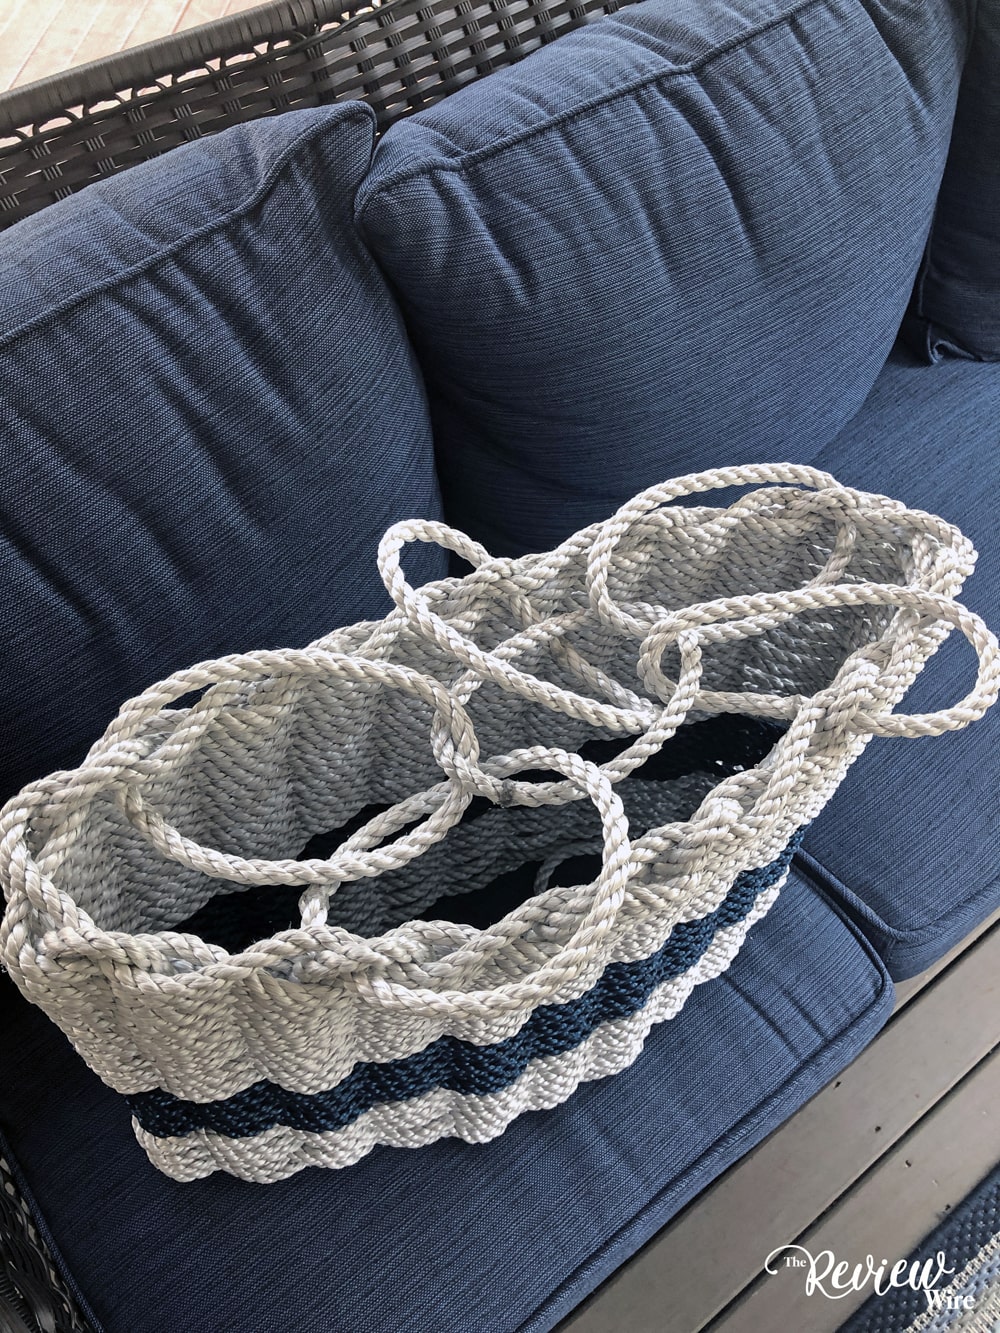 The Review Wire: Nautical Rope Basket from The Grommet